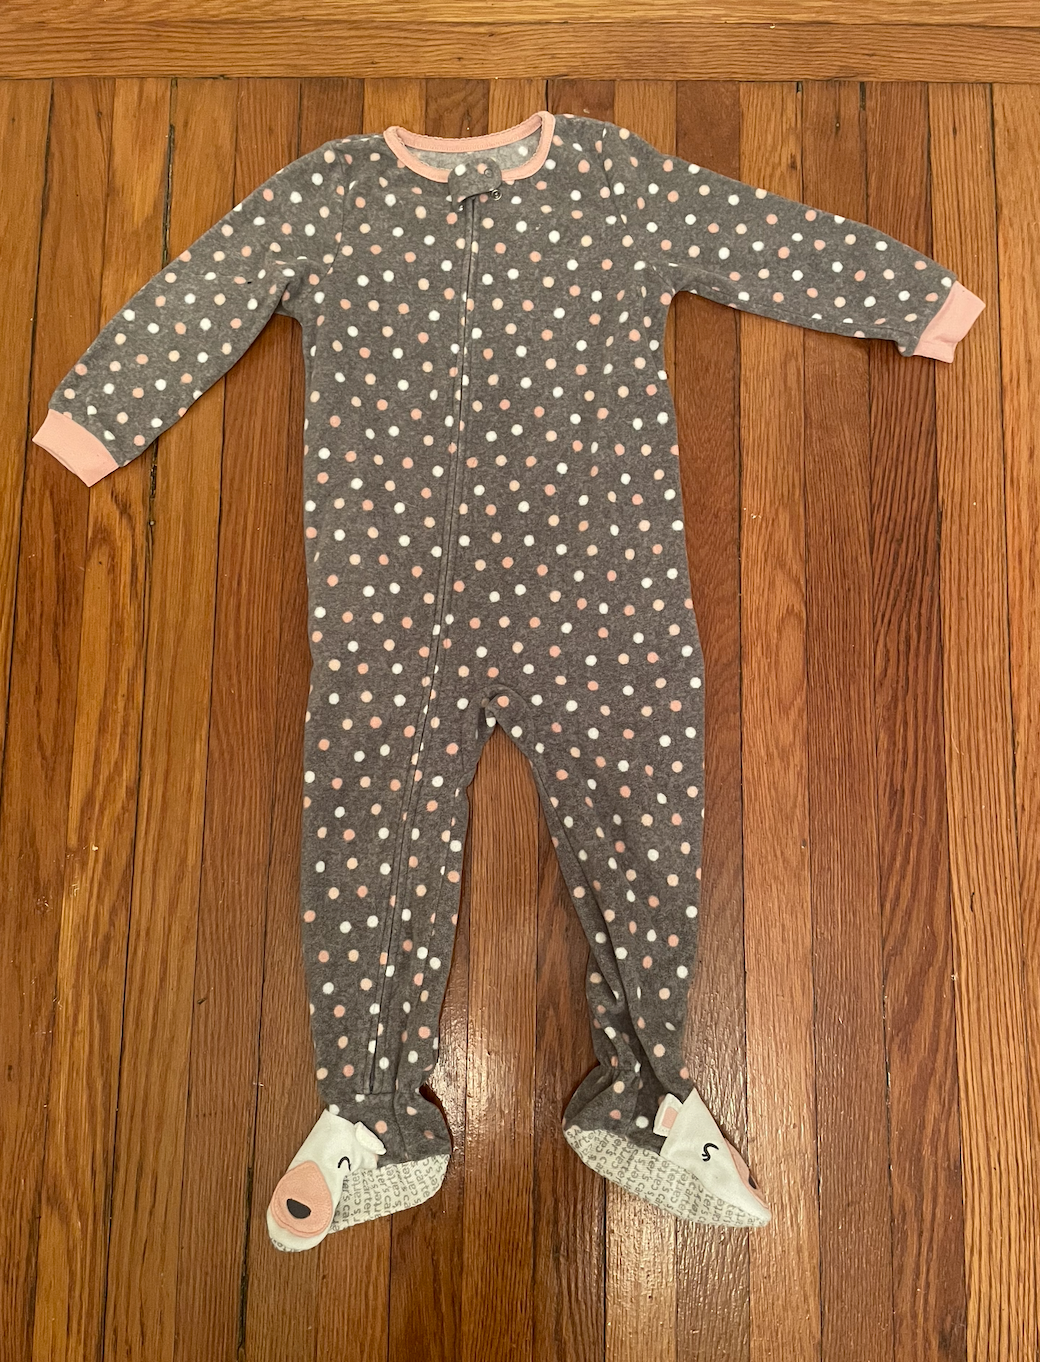 Carter's size 3T girls footie pajamas - gray with pink and white polka dots